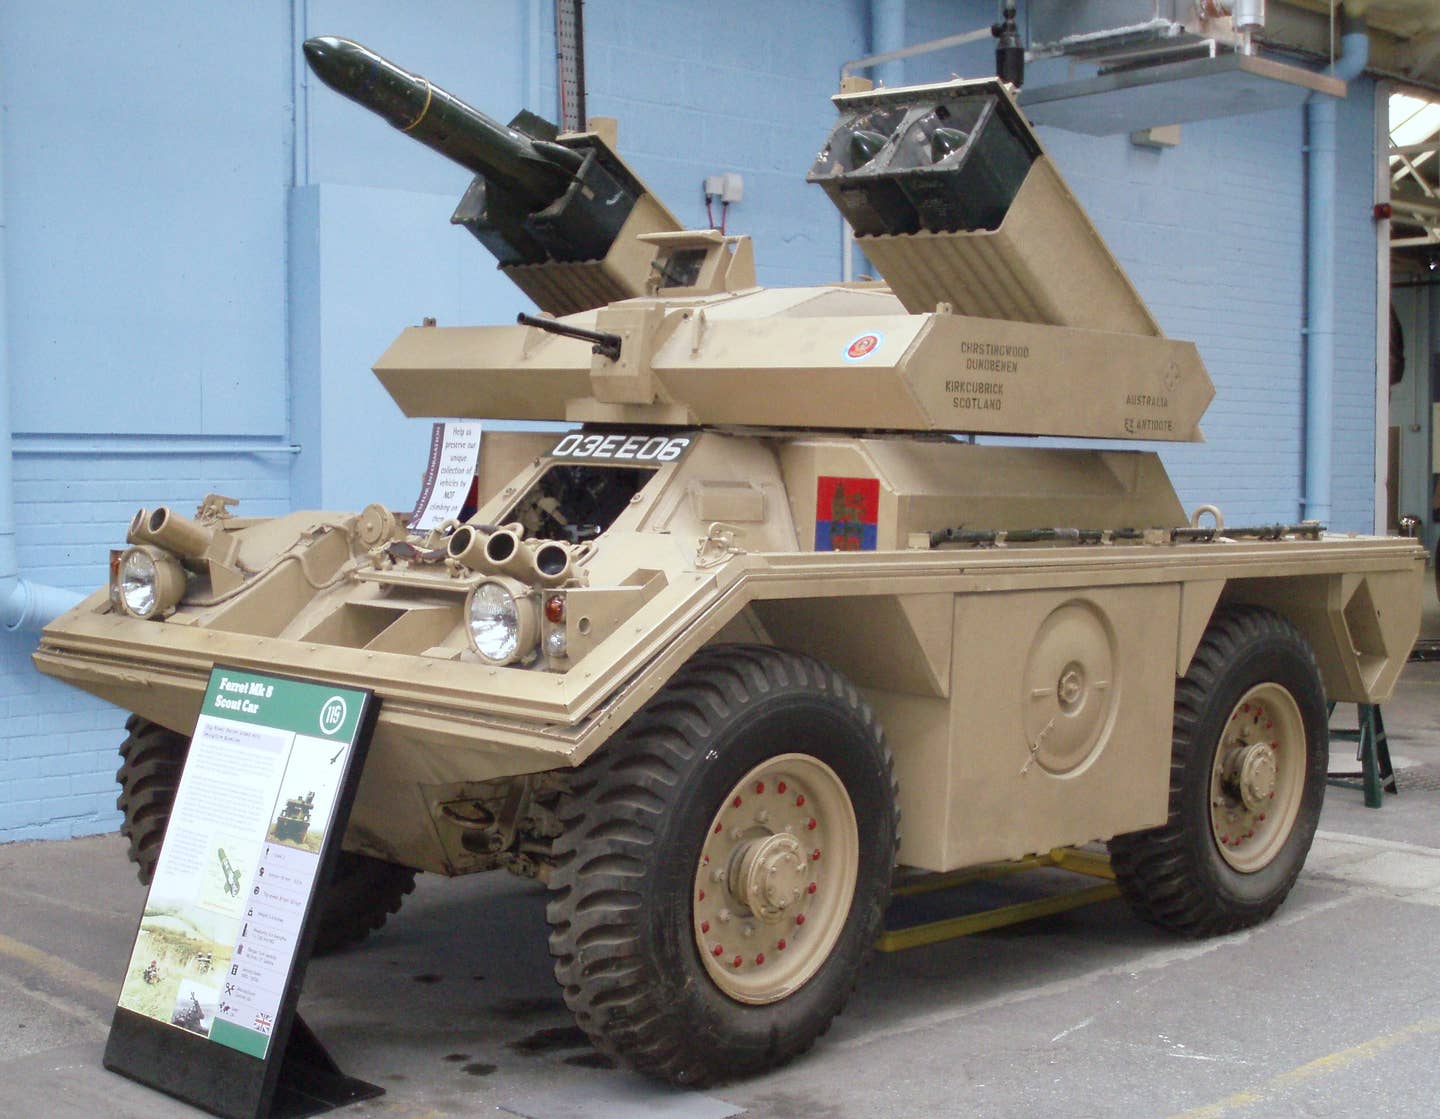 A Ferret Mk 5 at Bovington Tank Museum. This version was armed with four Swingfire anti-tank missiles. <em>DAVID HOLT/Wikimedia Commons</em>